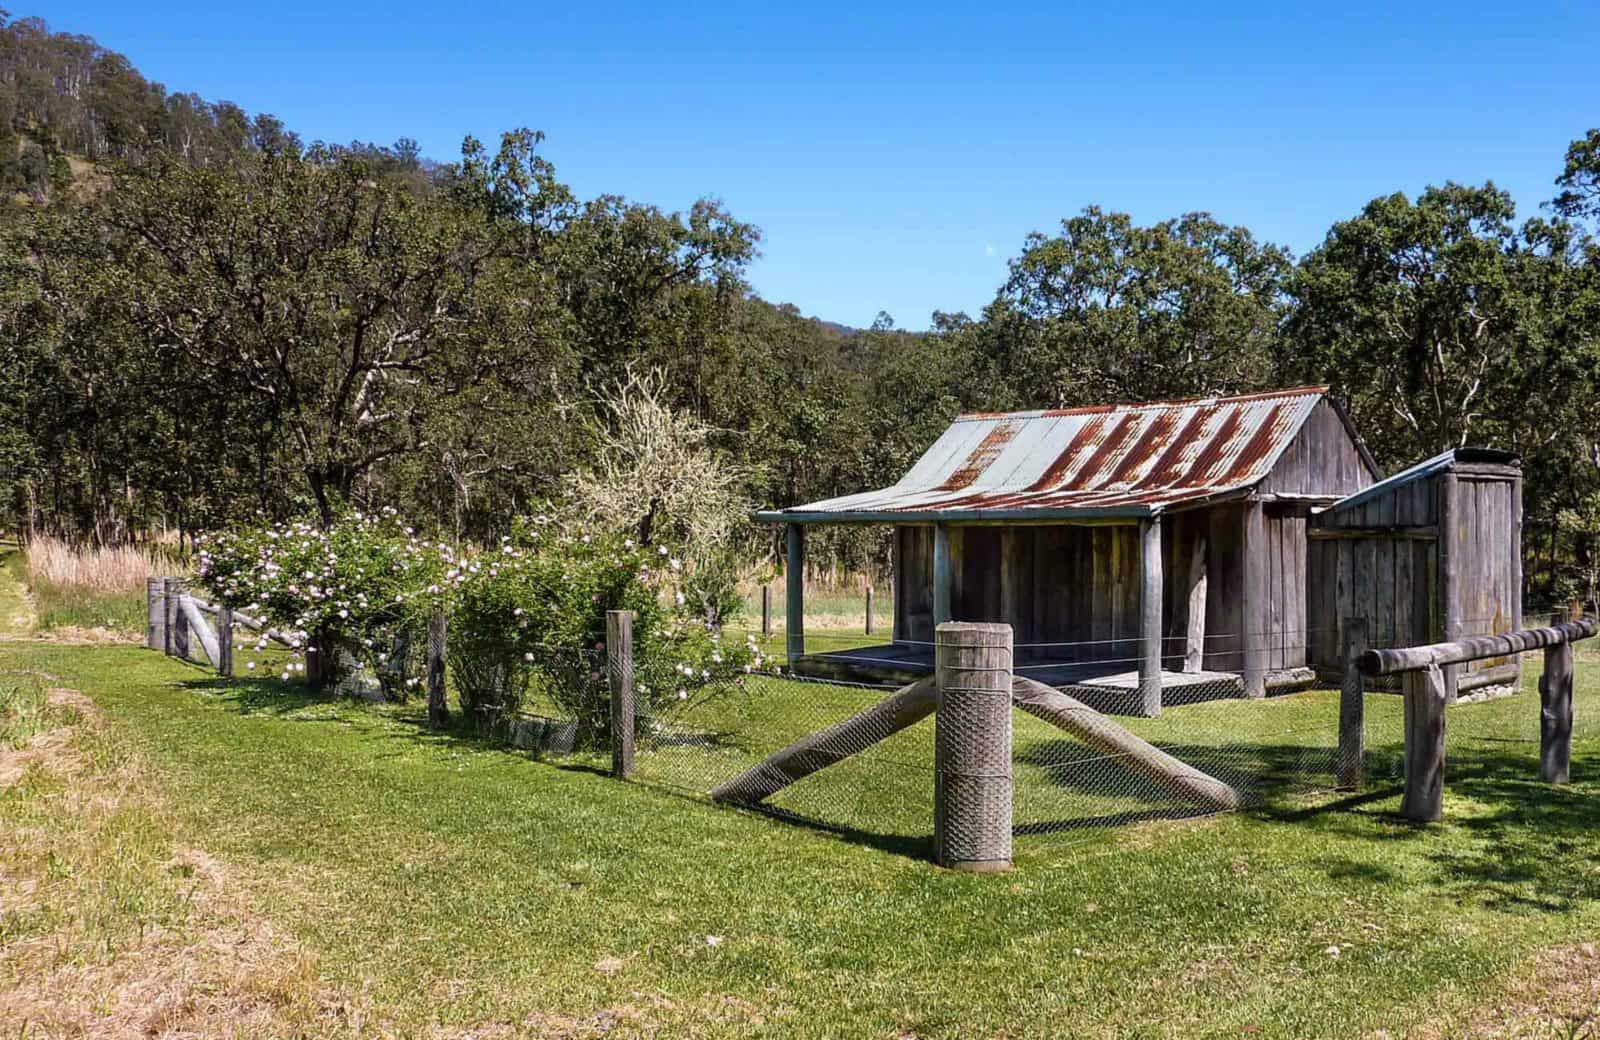 Youdales Hut and Yards, Oxley Wild Rivers National Parks. Photo: Rob Cleary/NSW Government